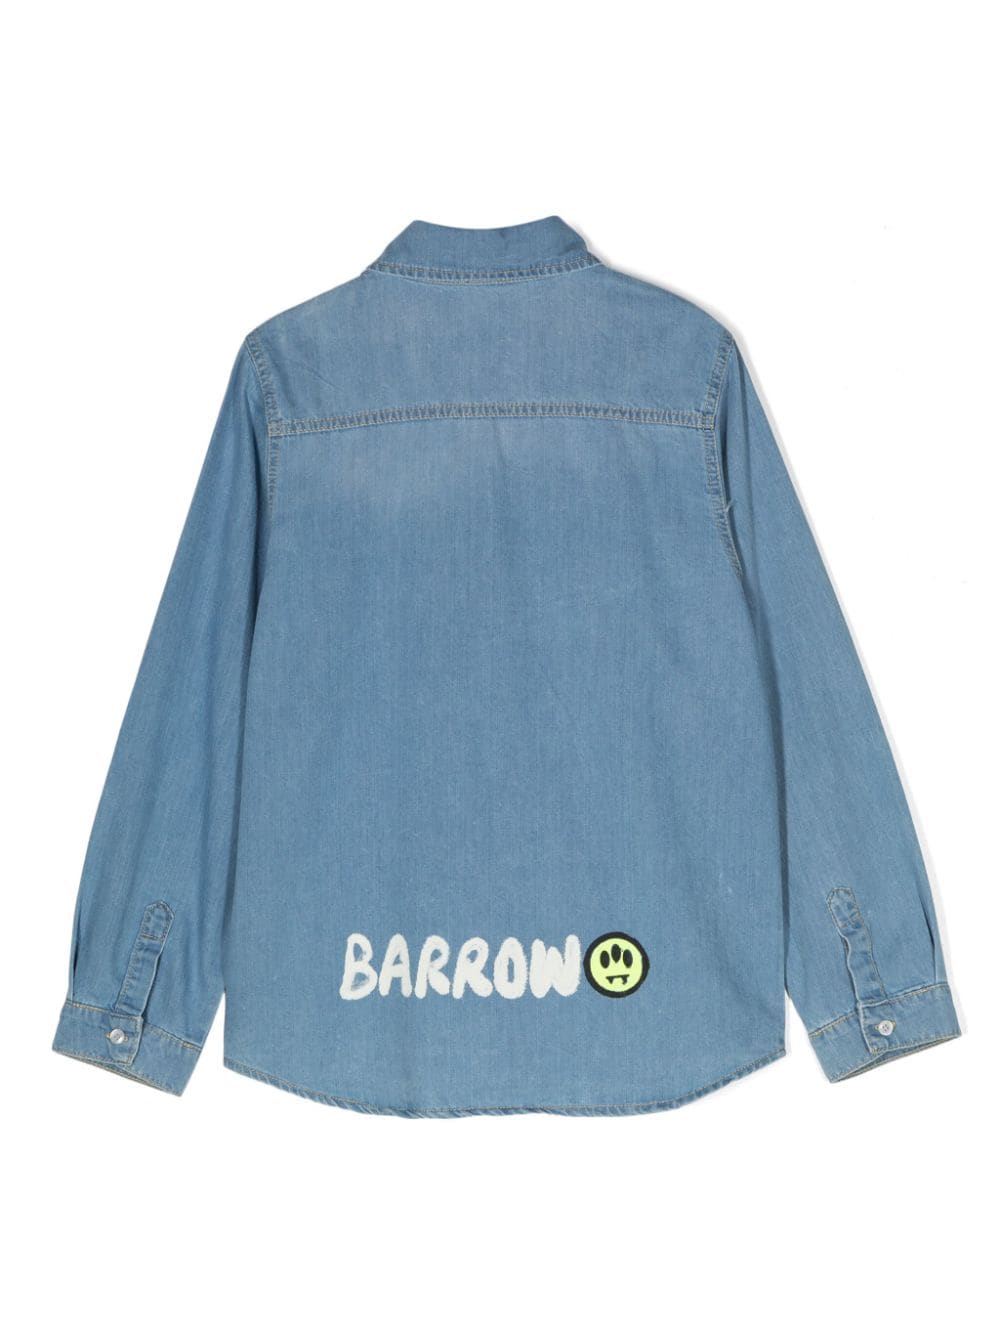 Barrow kids camicia in jeans